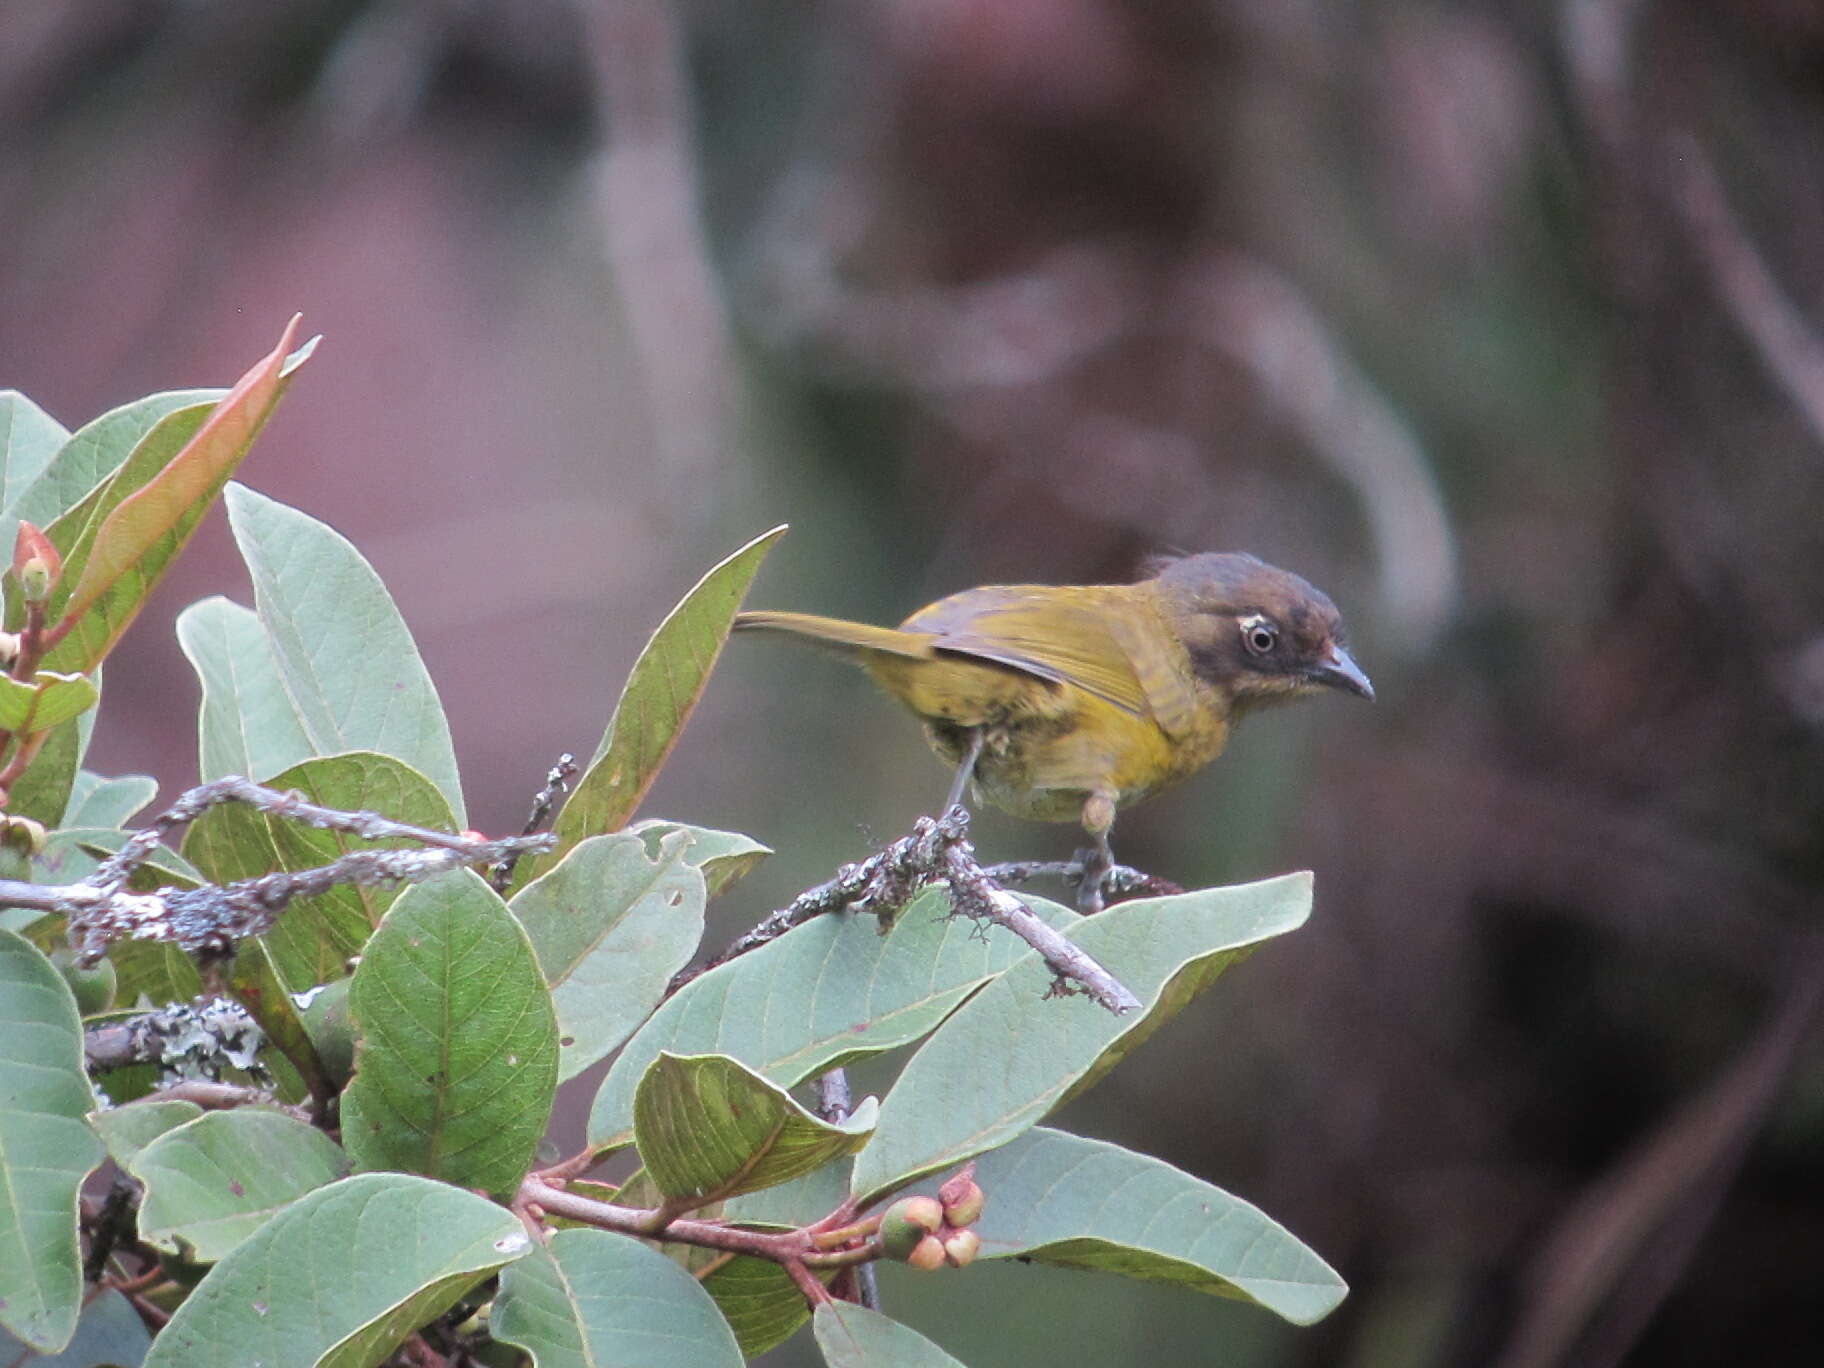 Image of Common Bush Tanager